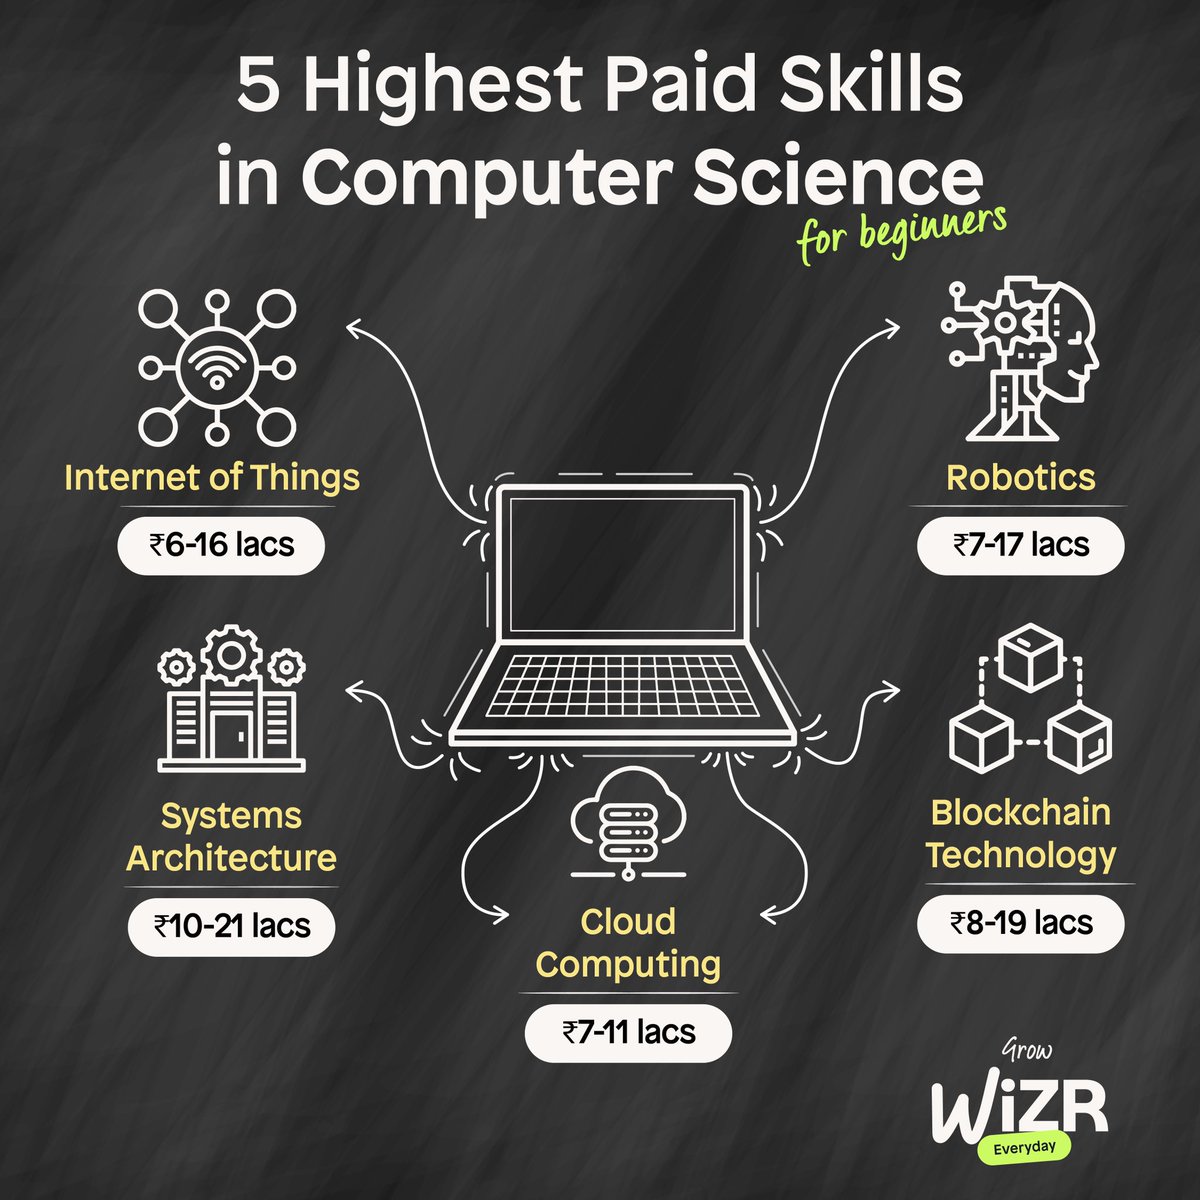 Crack the code to success by mastering these Computer Science skills!
#growWiZReveryday #upskilltoday #upskillingcourses #computerscience  #internetofthings #IOT #robotics #systemarchitecture #blockchain #cloudcomputing #WiZR